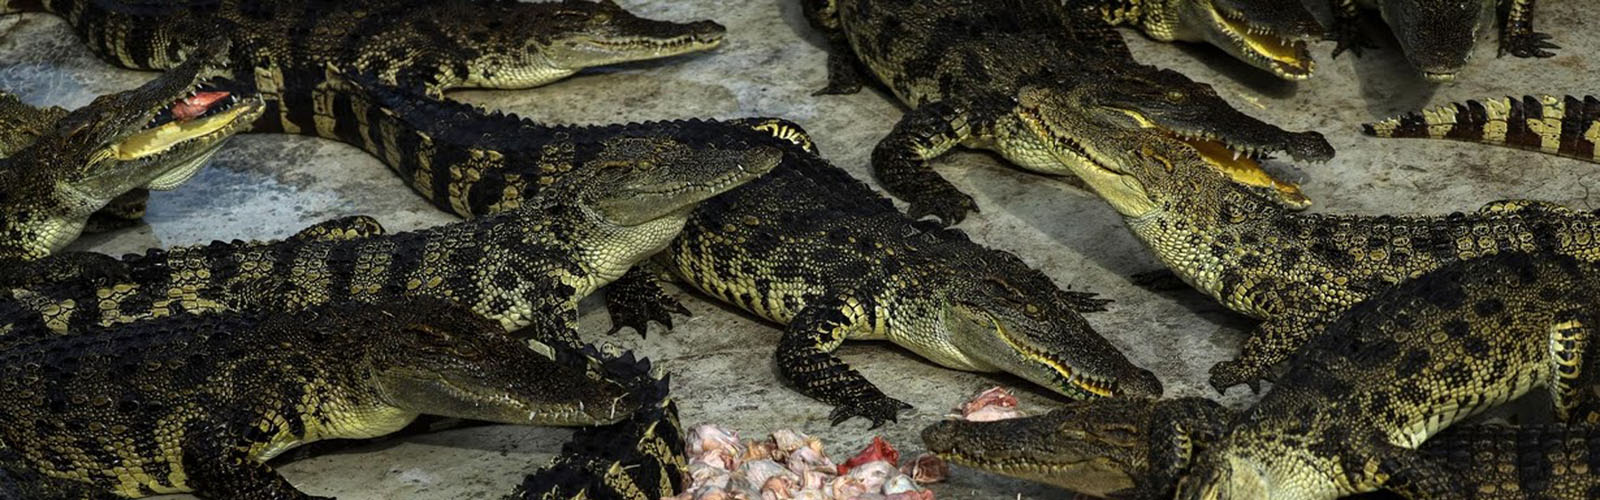 Thailand: Home to some of world's biggest crocodile farms